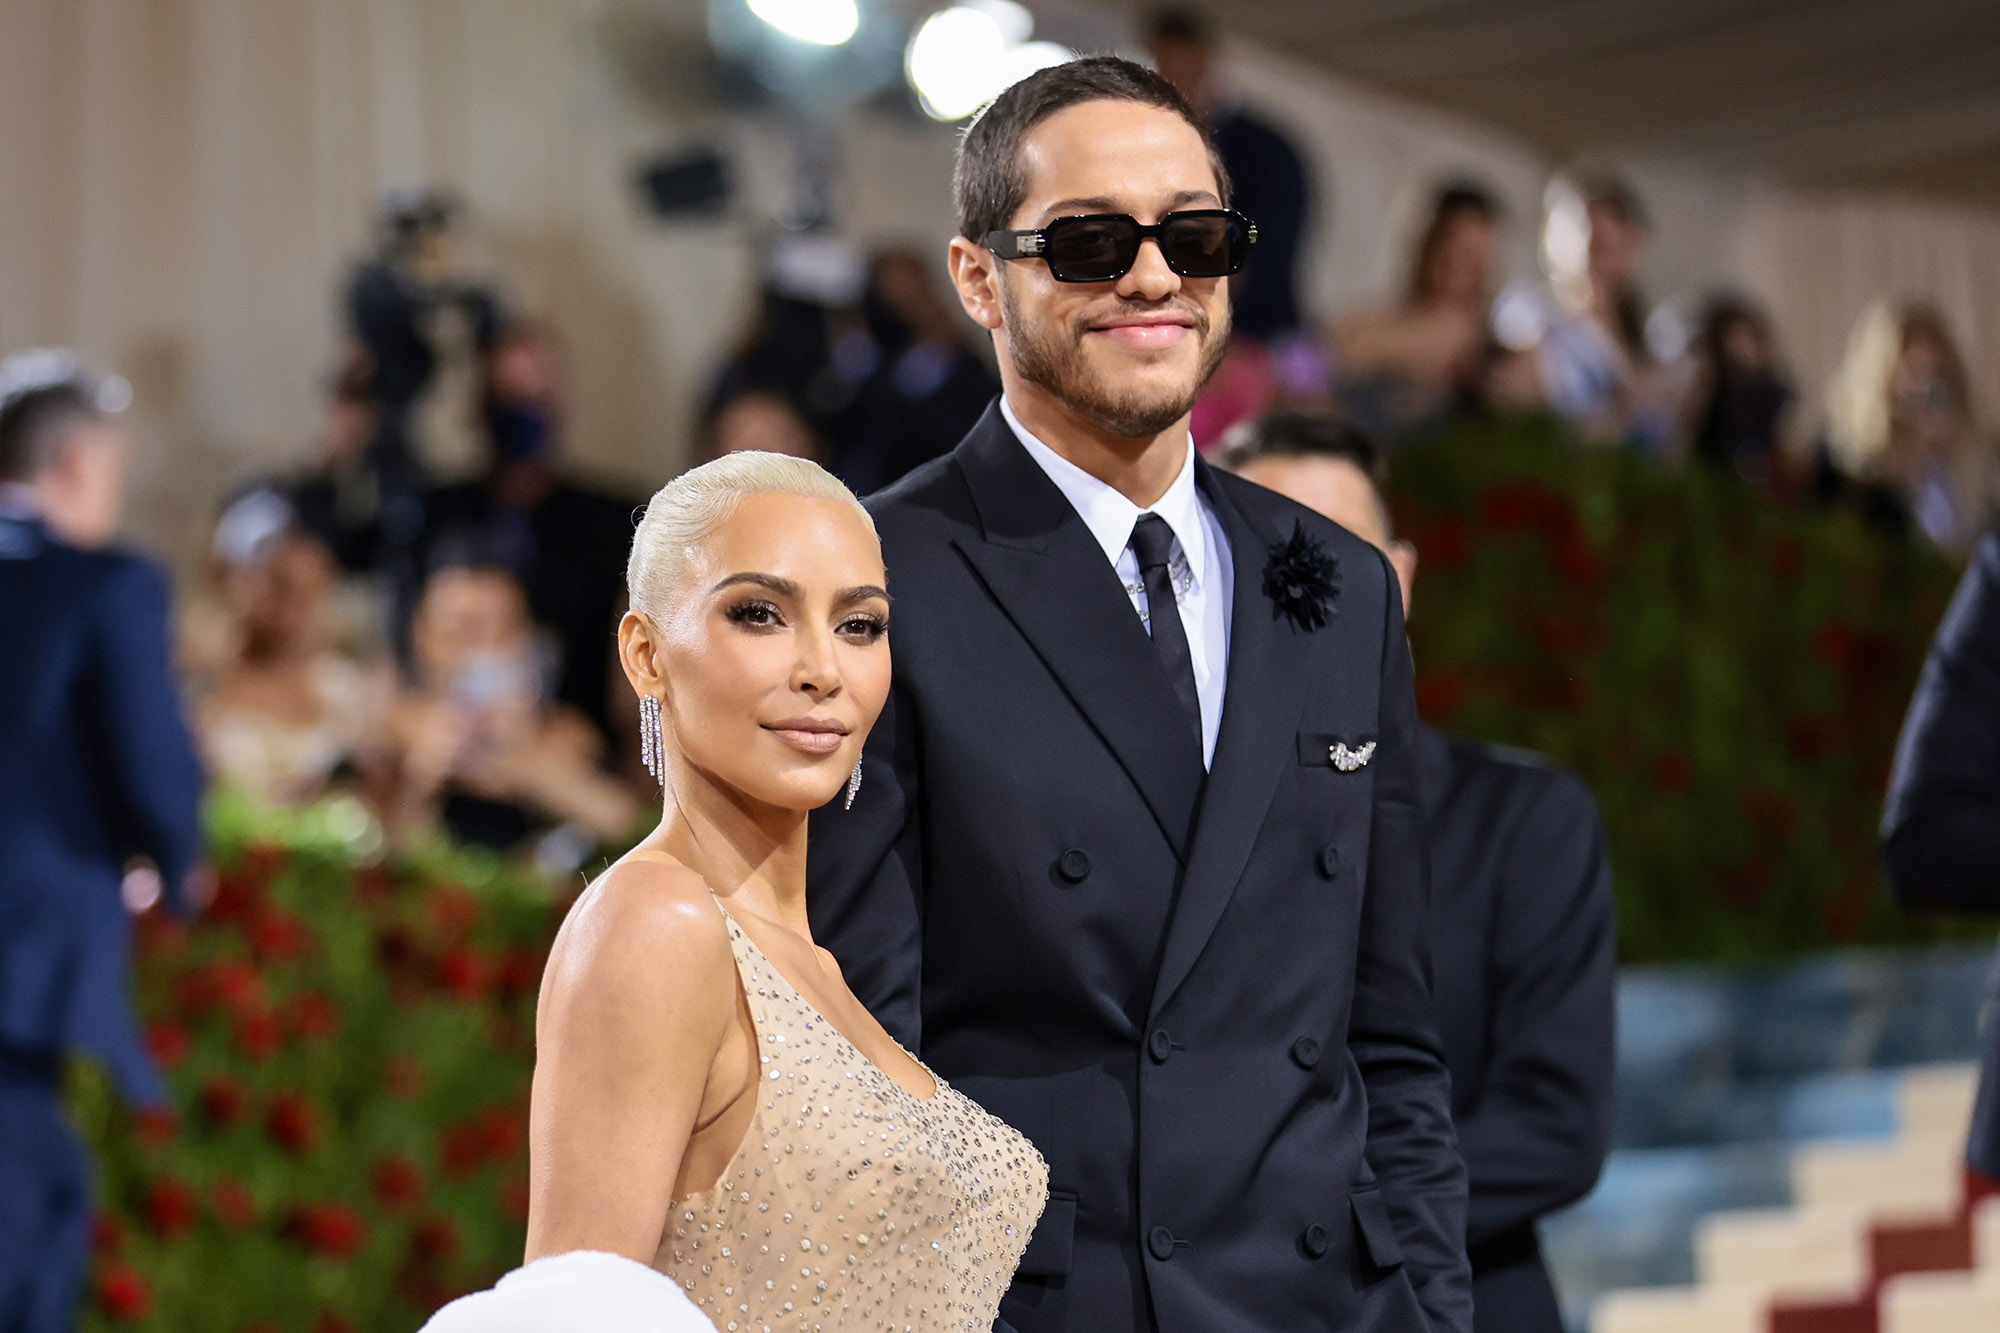 Kim Kardashian and Pete Davidson dated for nine months before their recent split.